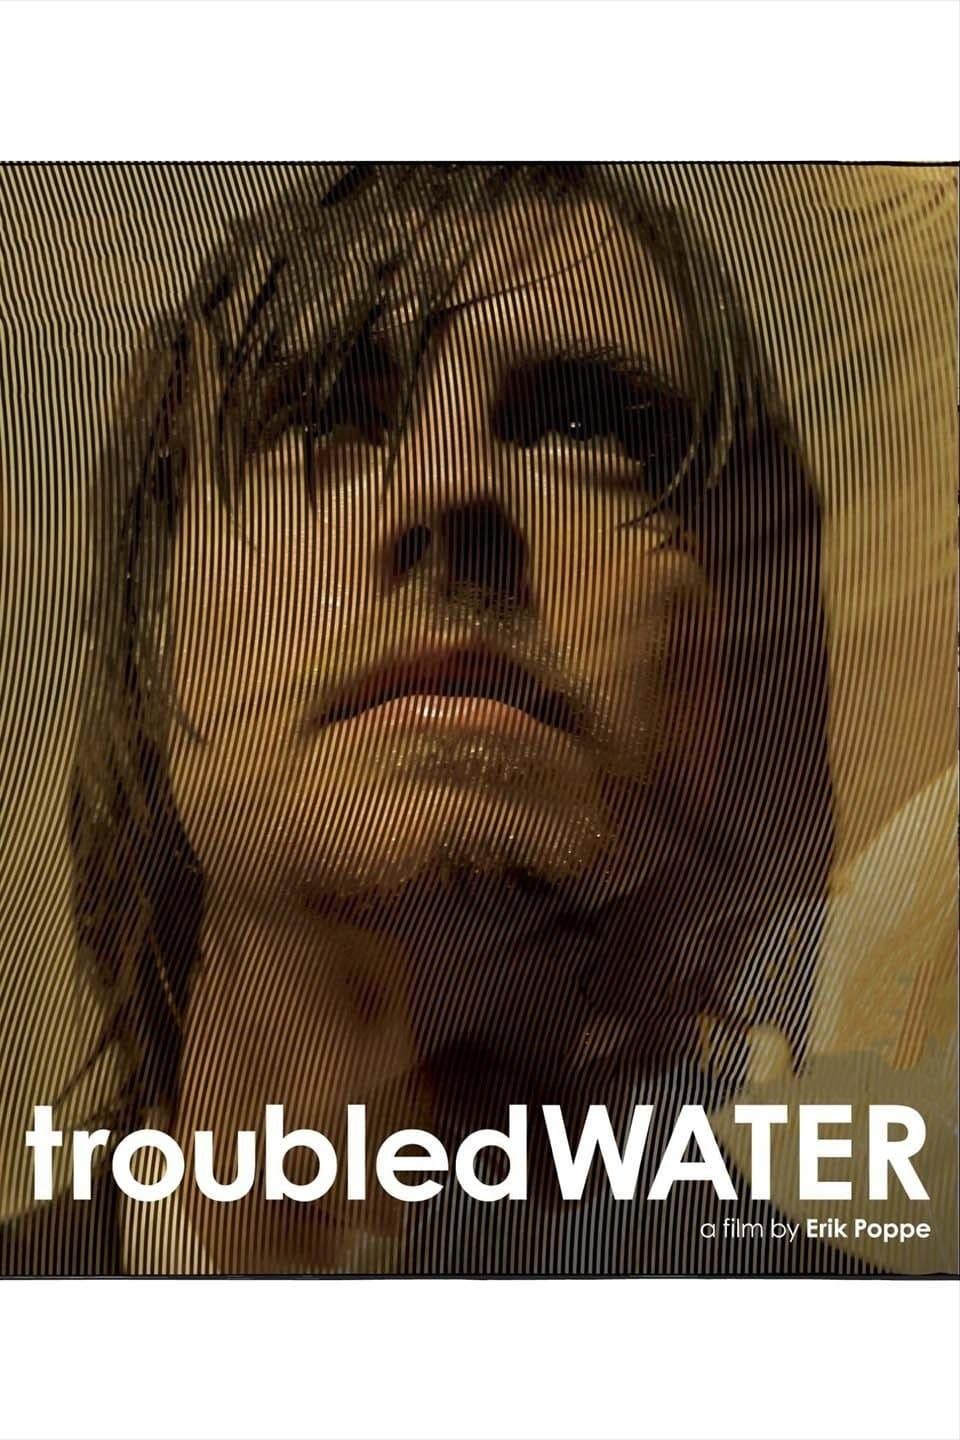 The film poster for 'Troubled Water ' featuring someone with a wet face looking upwards